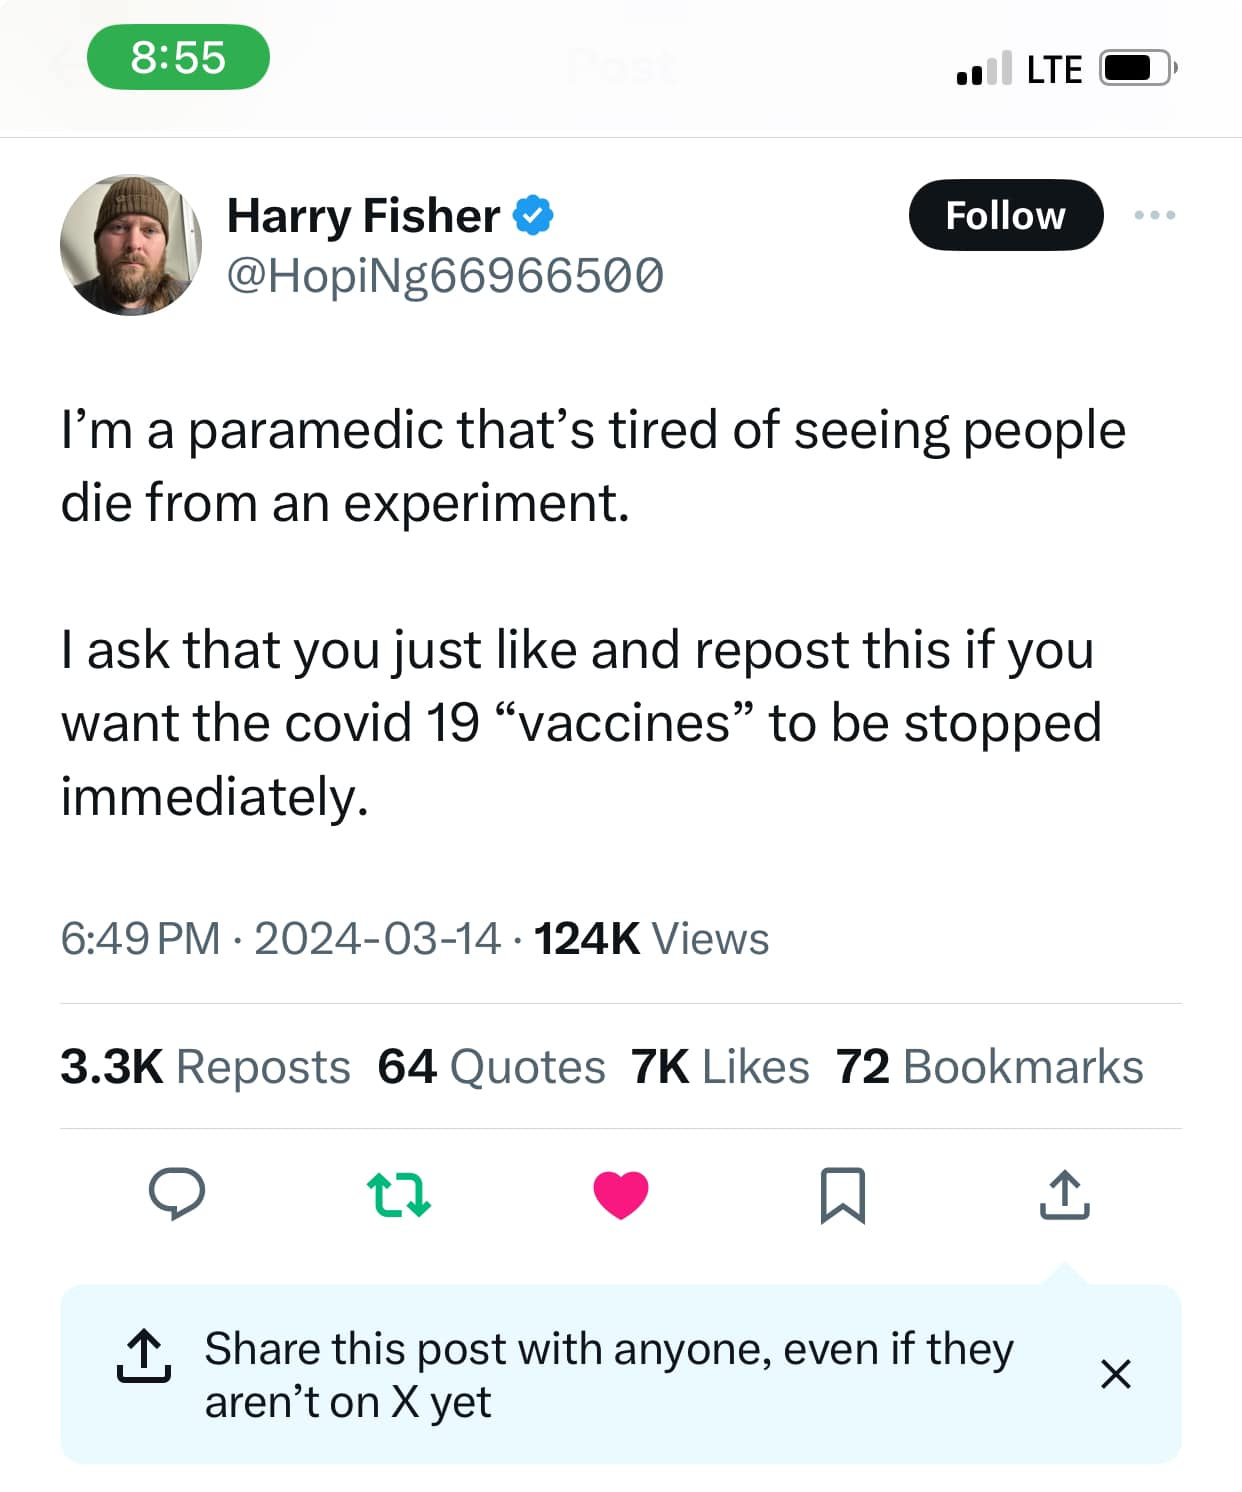 May be an image of 1 person and text that says '8:55 LTE Harry Fisher @HopiNg66966500 Follow I'm a paramedic that's tired of seeing people die from an experiment. I ask that you just like and repost this if you want the covid 19 "vaccines" to be stopped immediately. 6:49 PM 2024-03-14 124K Views 3.3K Reposts 64 Quotes 7K Likes 72 Bookmarks Share this post with anyone, even if they aren't on X yet'